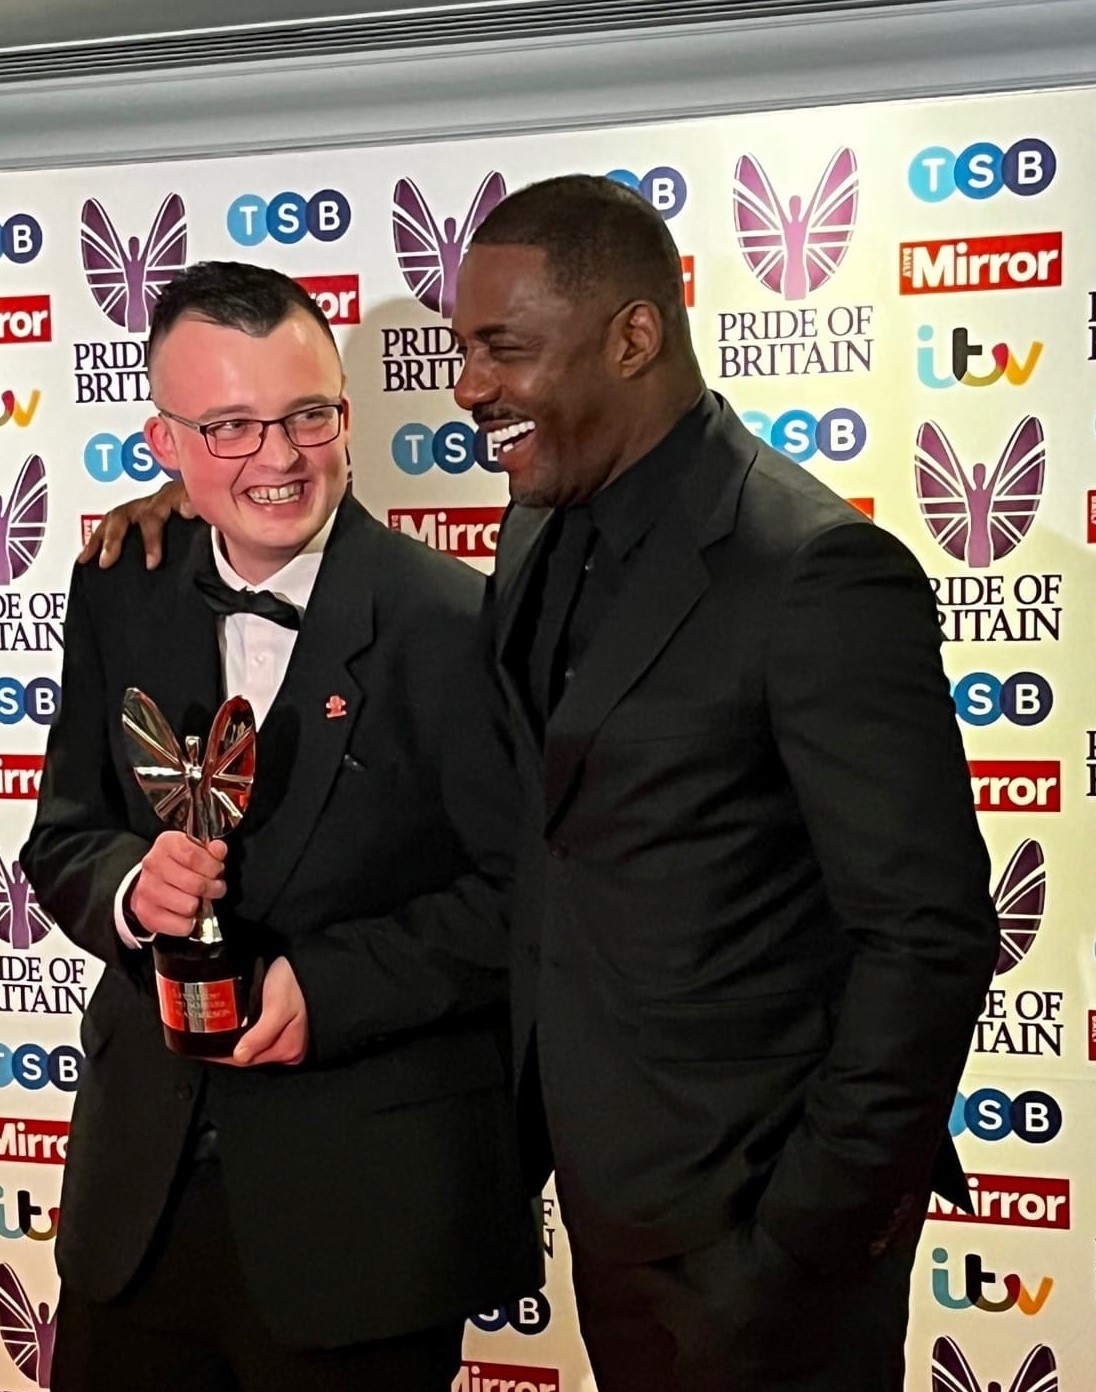 Image shows actor Idris Elba with Alex holding his award on the red carpet.